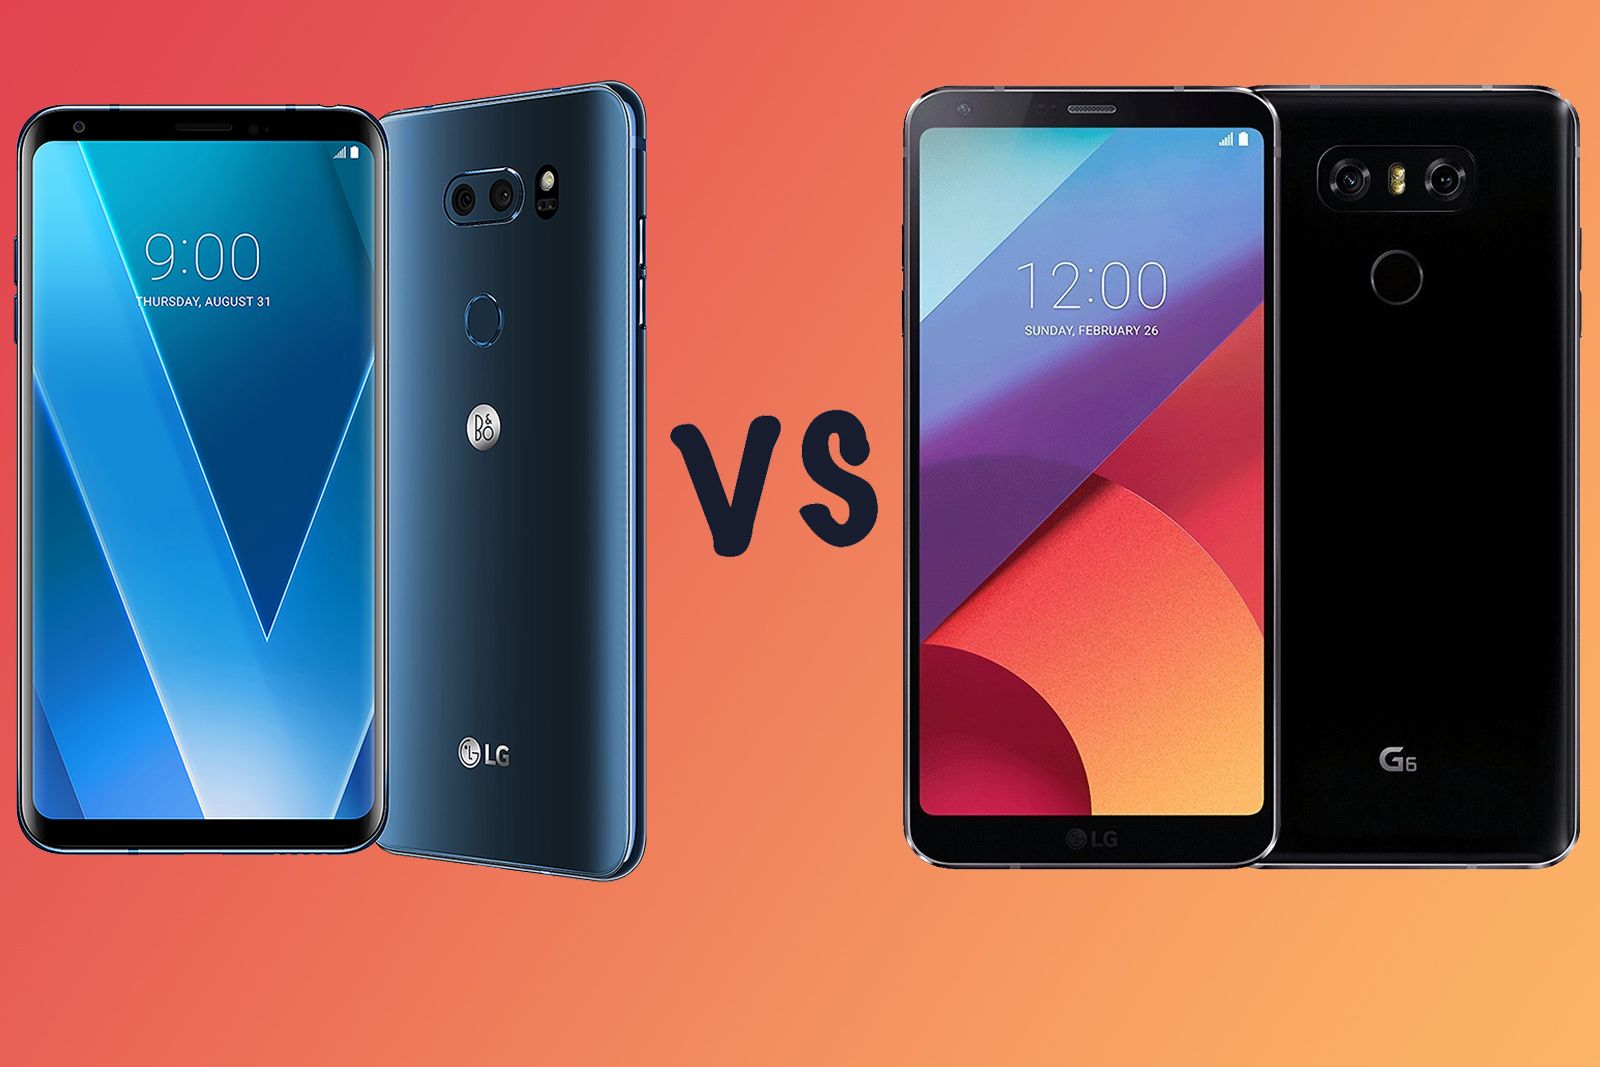 LG V30 vs LG G6 Whats the difference image 1